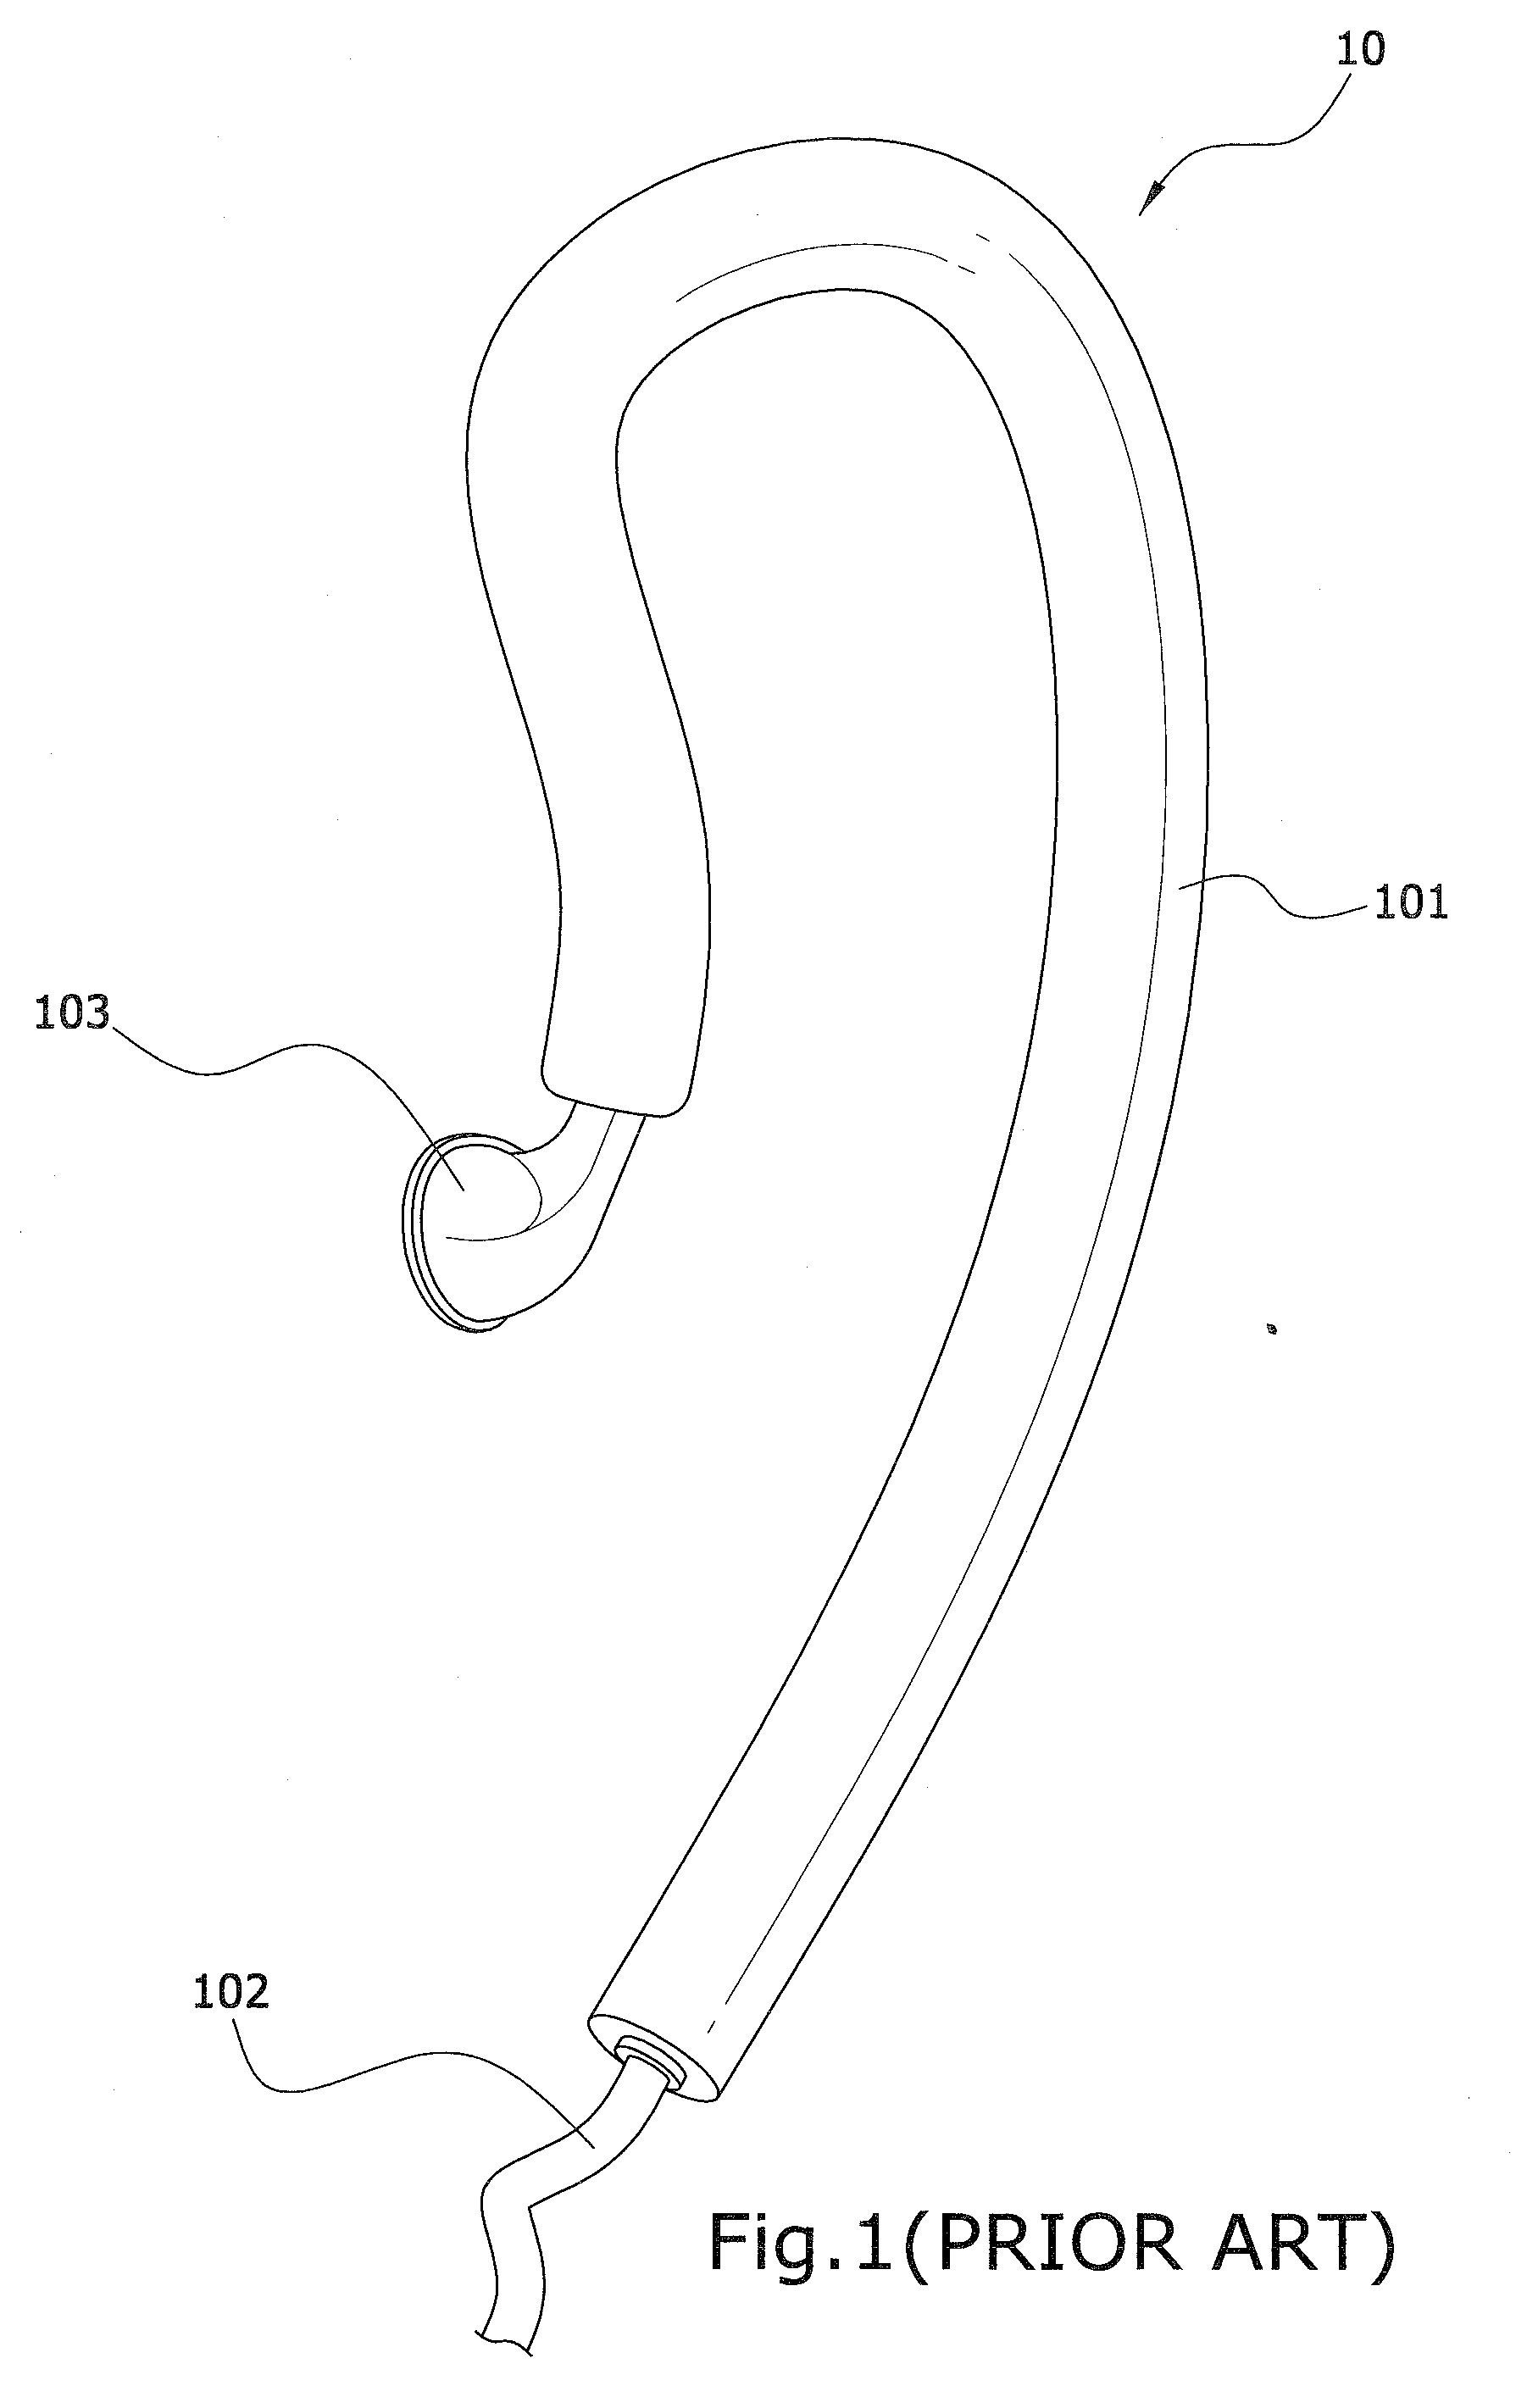 Structure of over-the-ear hook